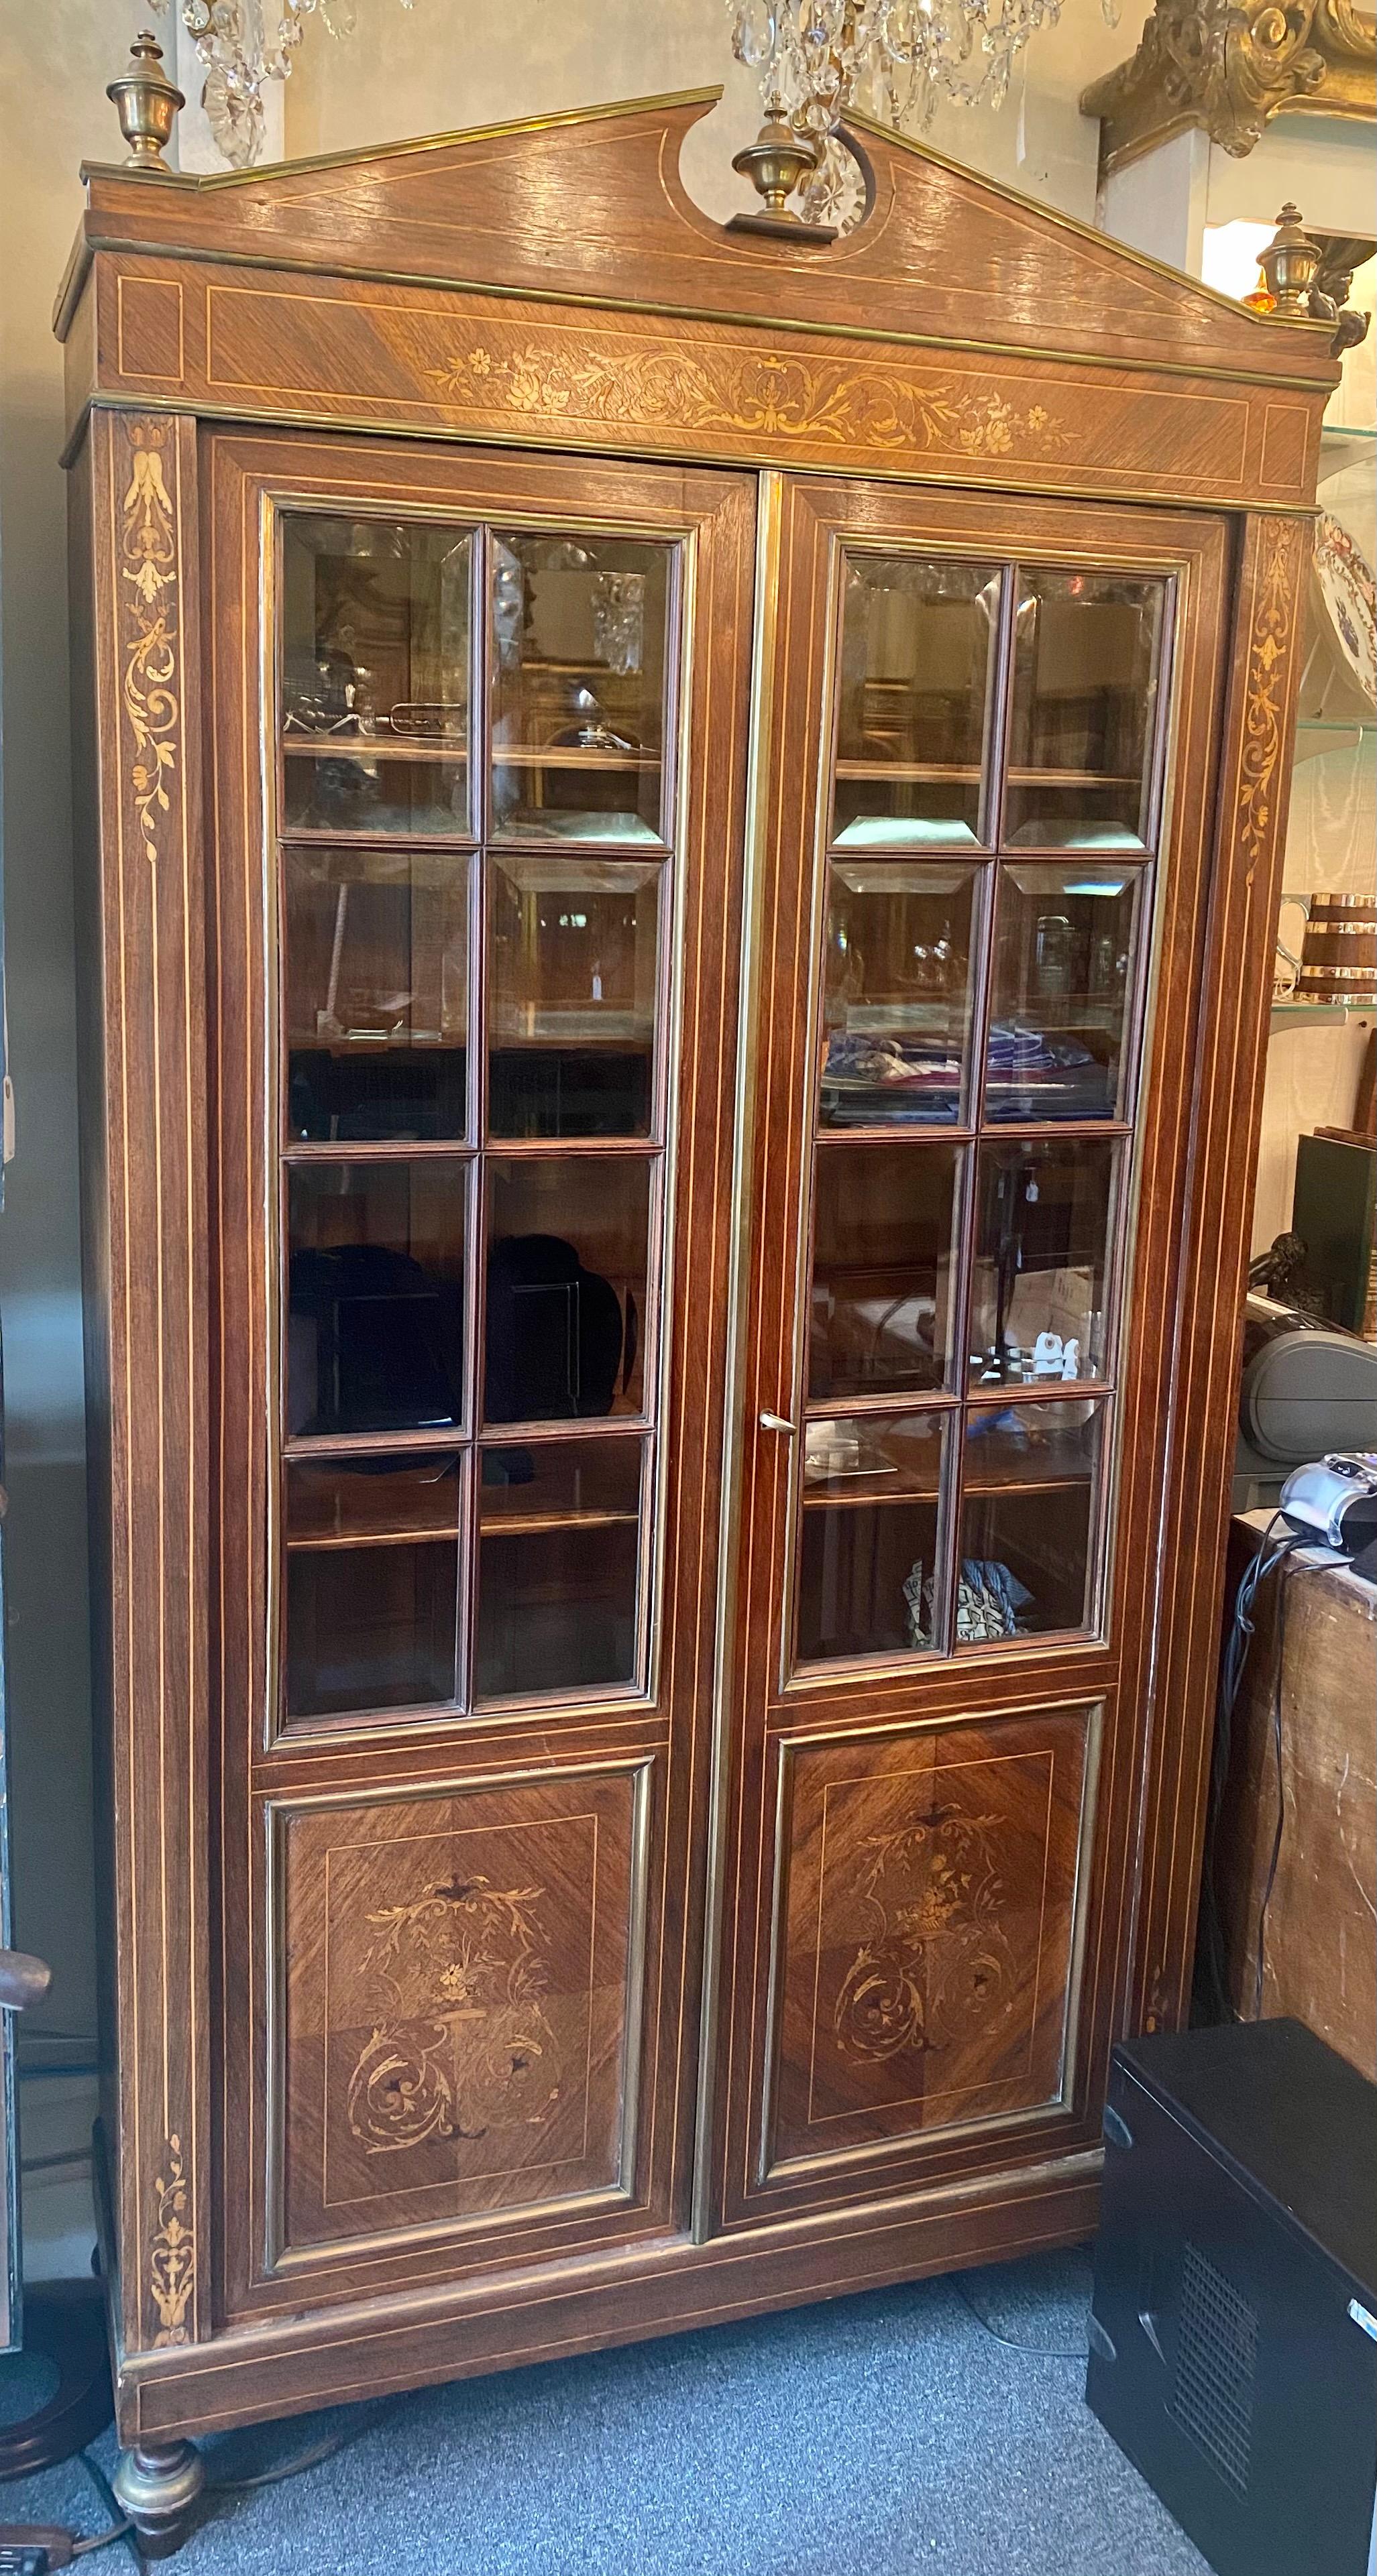 Antique French Charles X Rosewood and Satinwood Vitrine Bookcase, circa 1860s For Sale 4